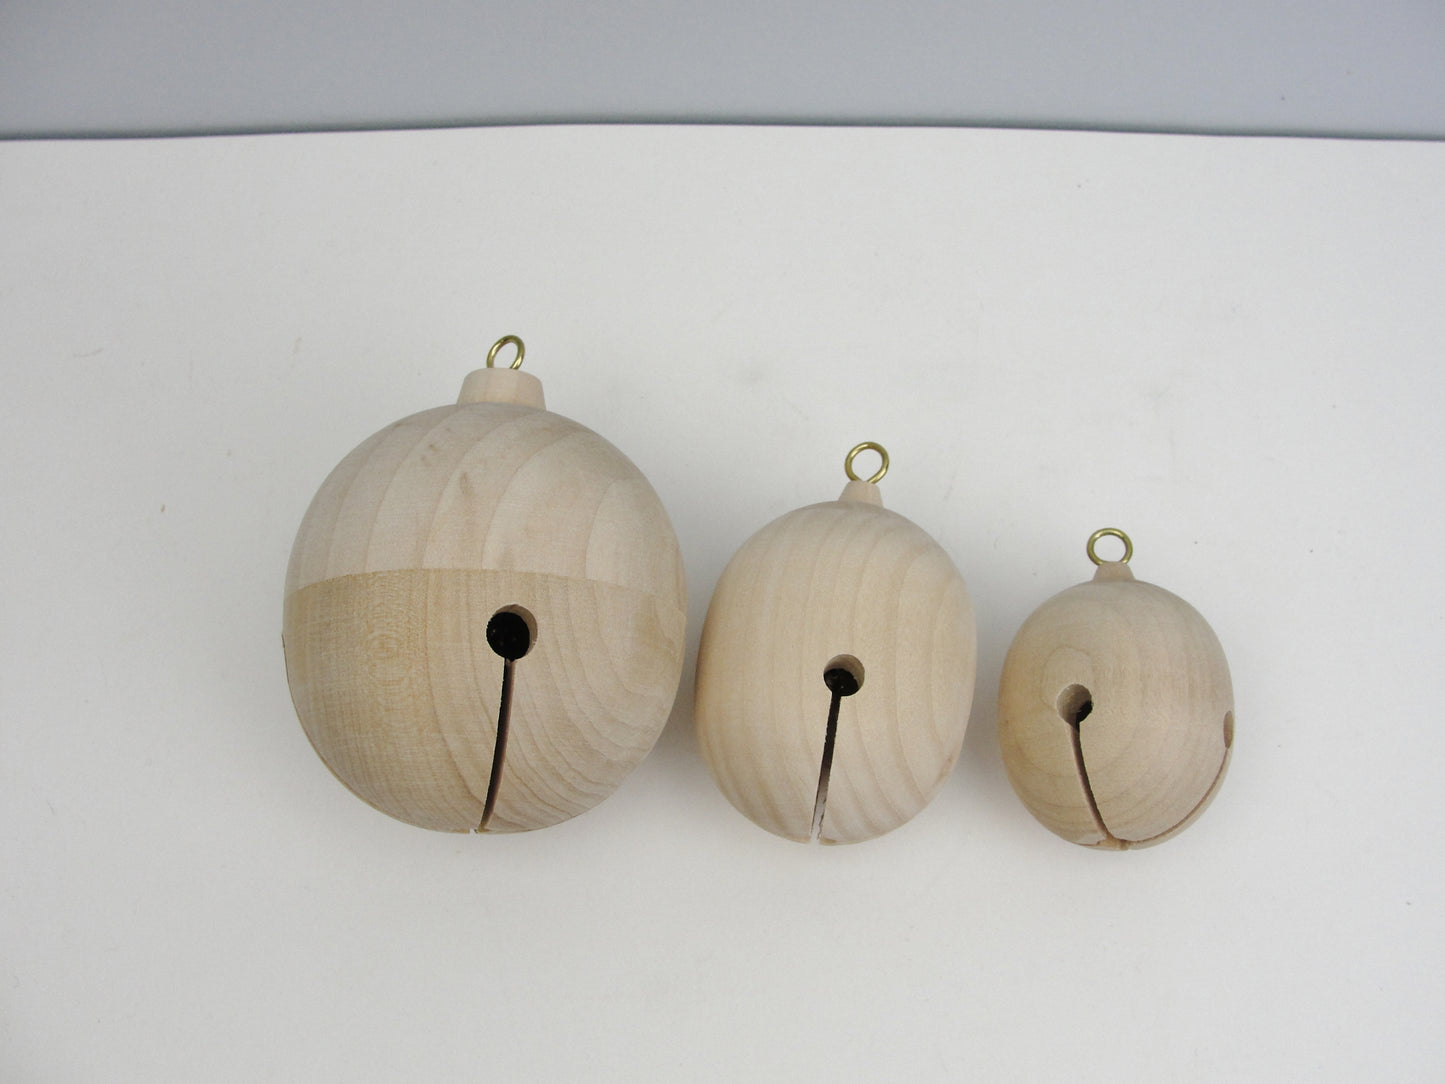 Wood jingle bell choose of 3 available sizes - Wood parts - Craft Supply House